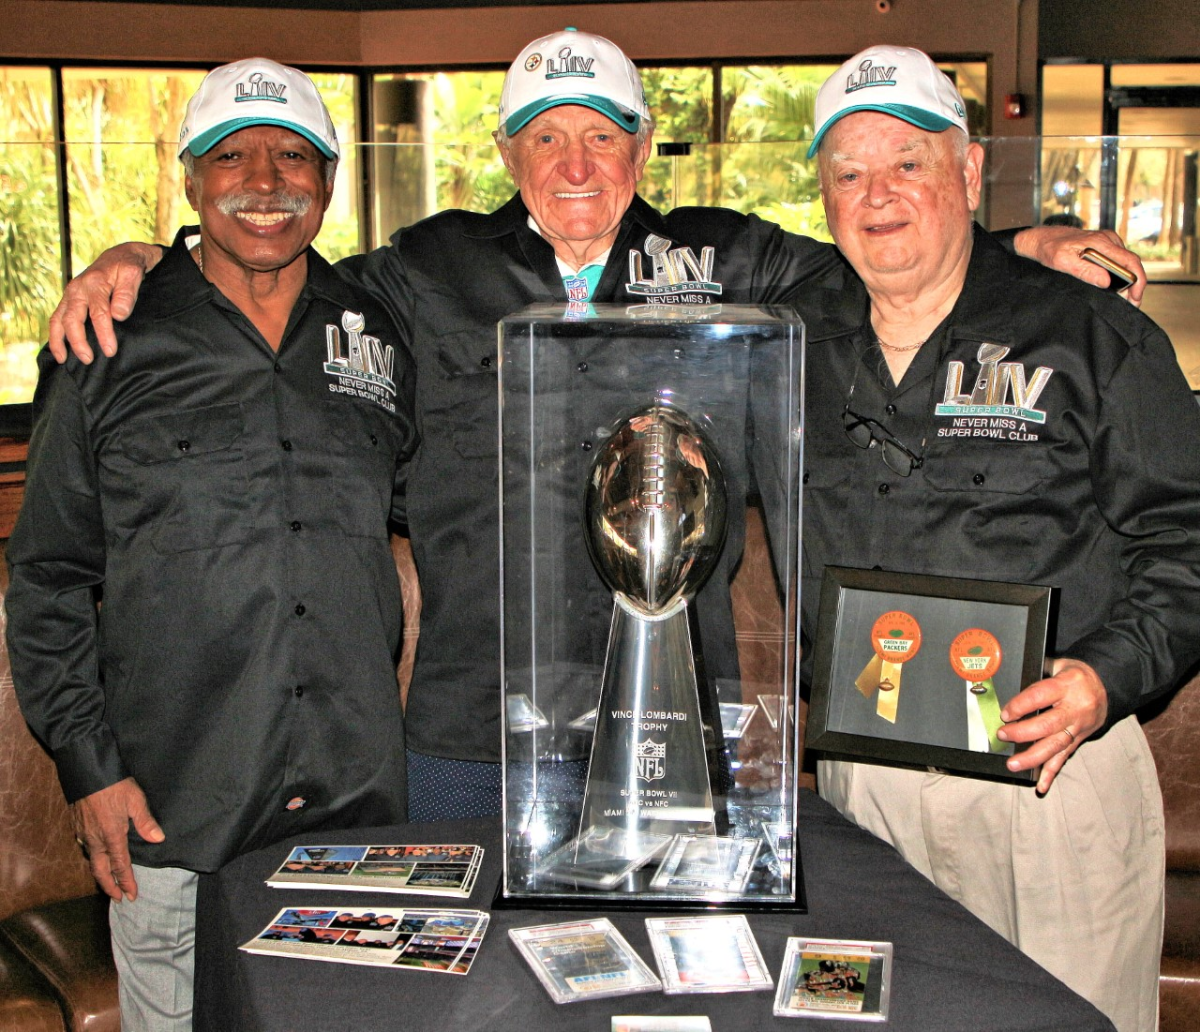 From left to right: Gregory Eaton, Tom Henschel and Don Crisman pose with a replica of the Vince Lombardi Trophy.